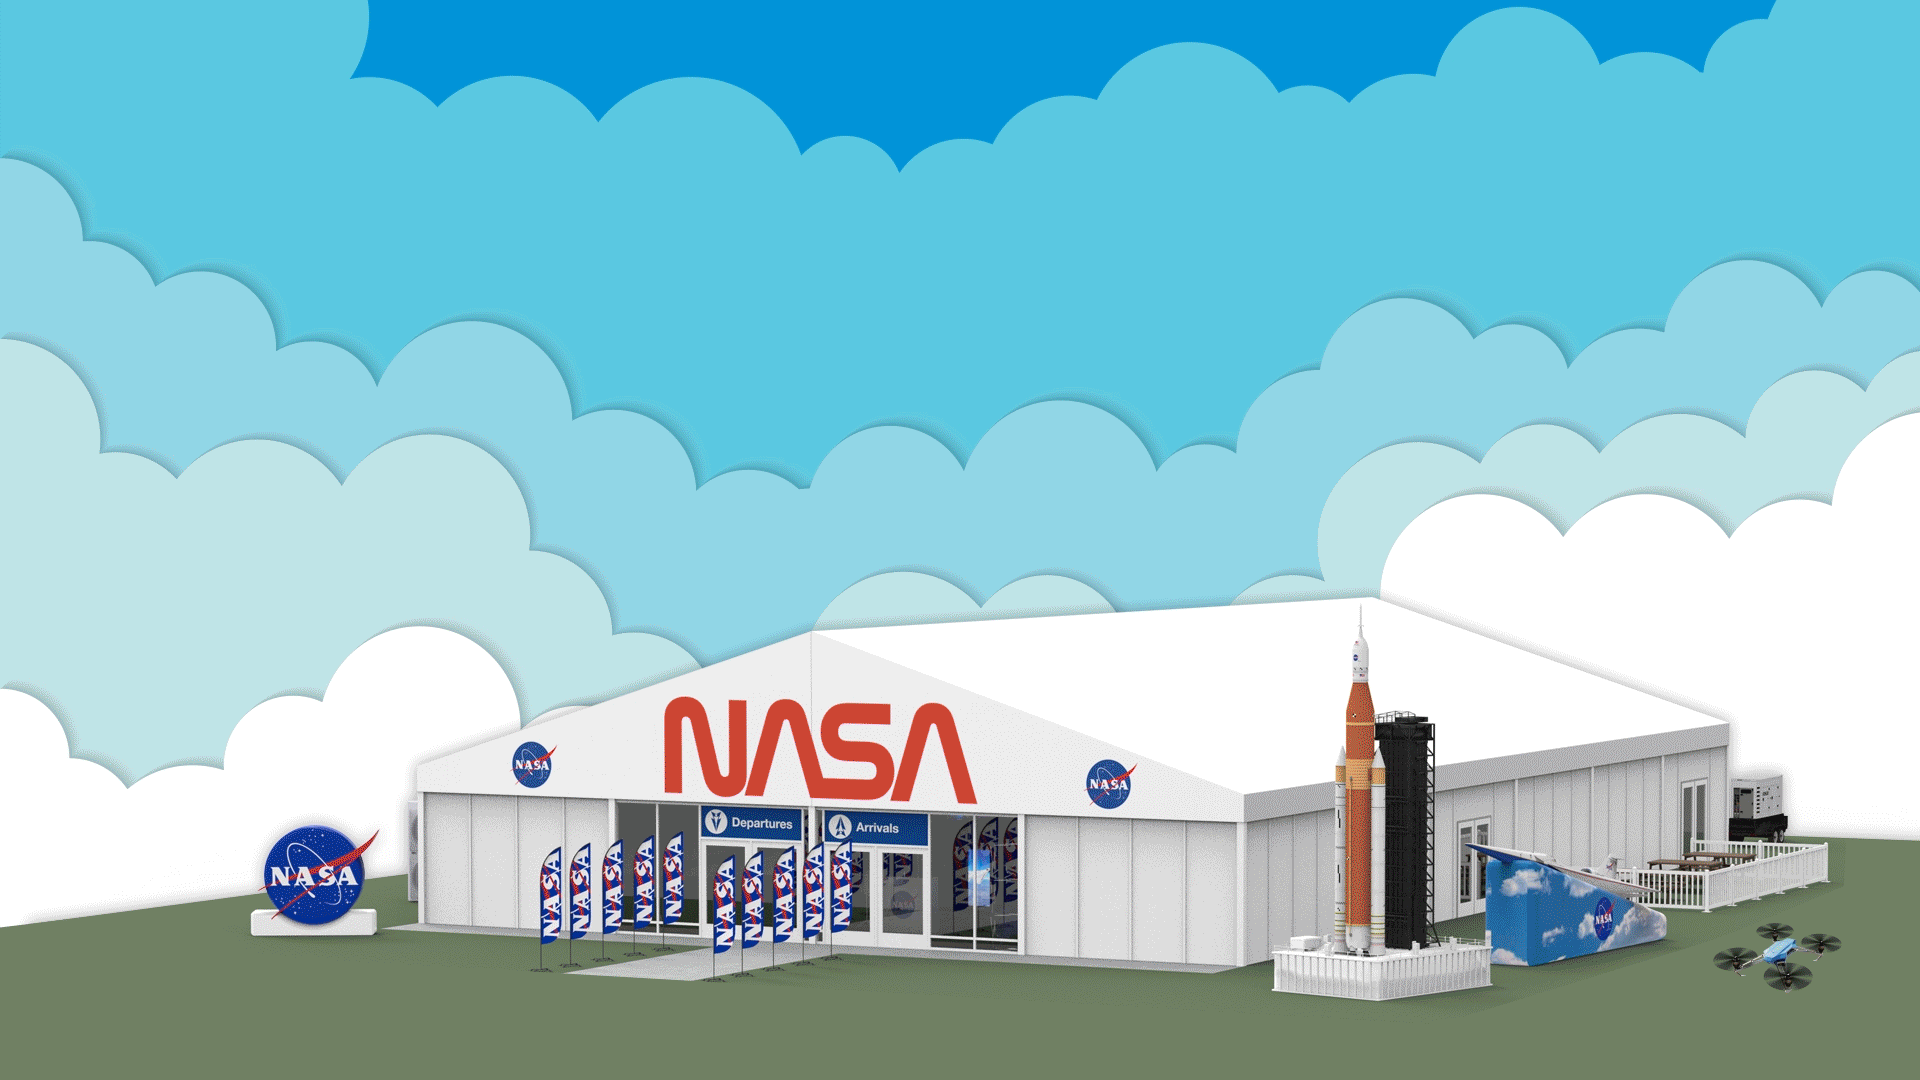 An animated illustration shows NASA's pavilion at Oshkosh, a large white tent with NASA logos on it, as six different aircraft appear to fly toward the center of the image over the tent.